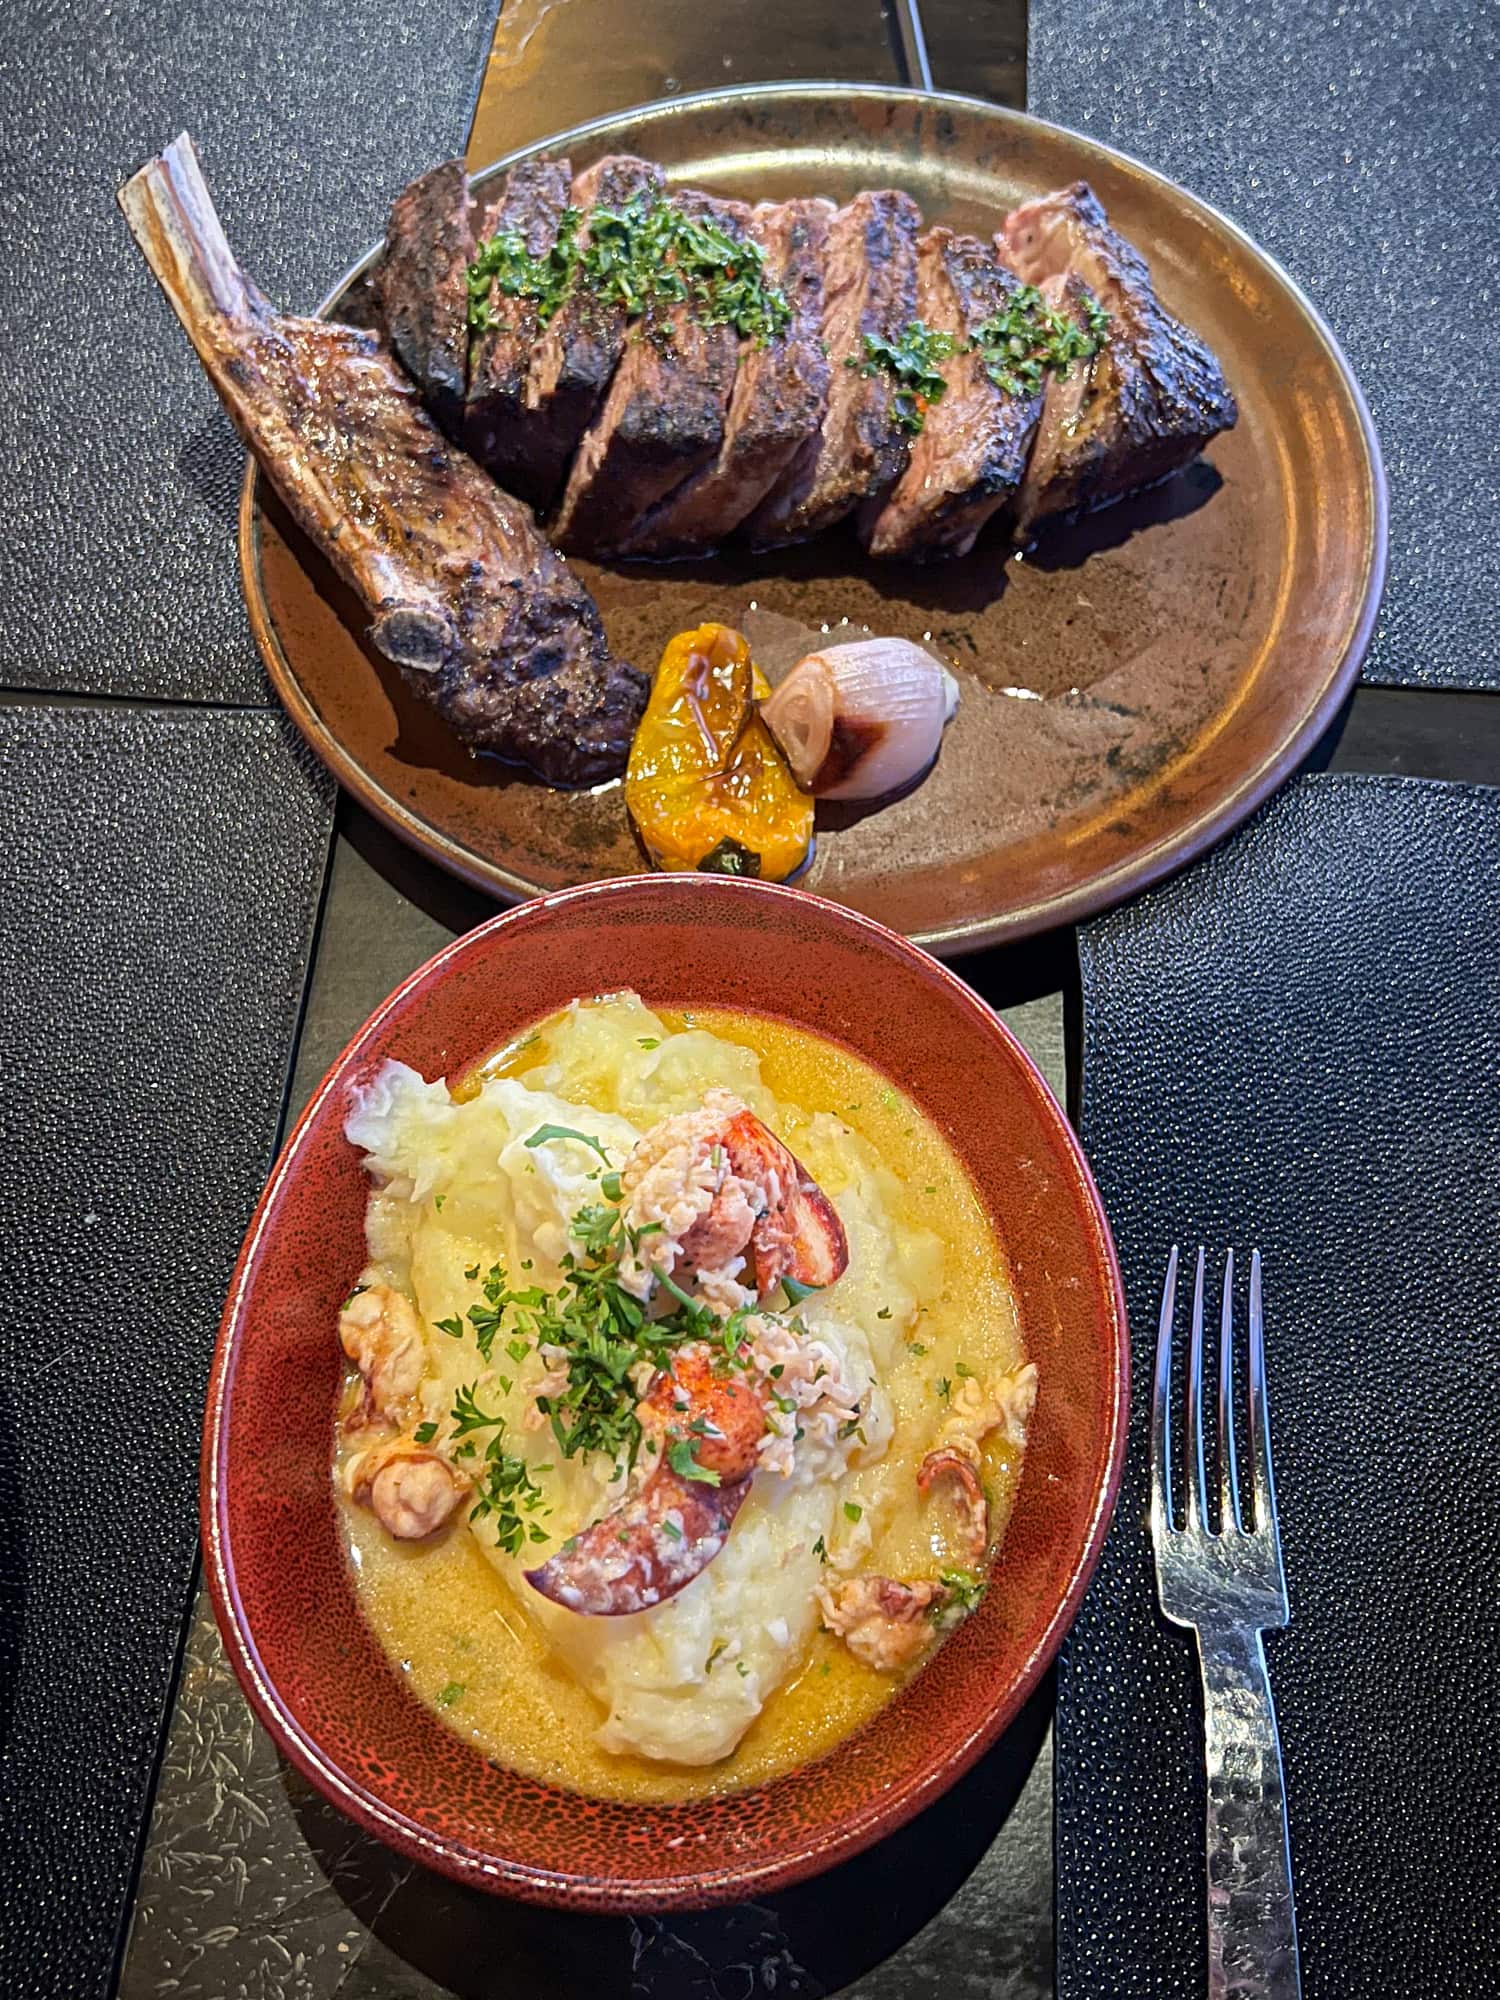 Lemon mashed potatoes with lobster with a 32-ounce bone-in ribeye steak at Mariposa in Sedona, AZ